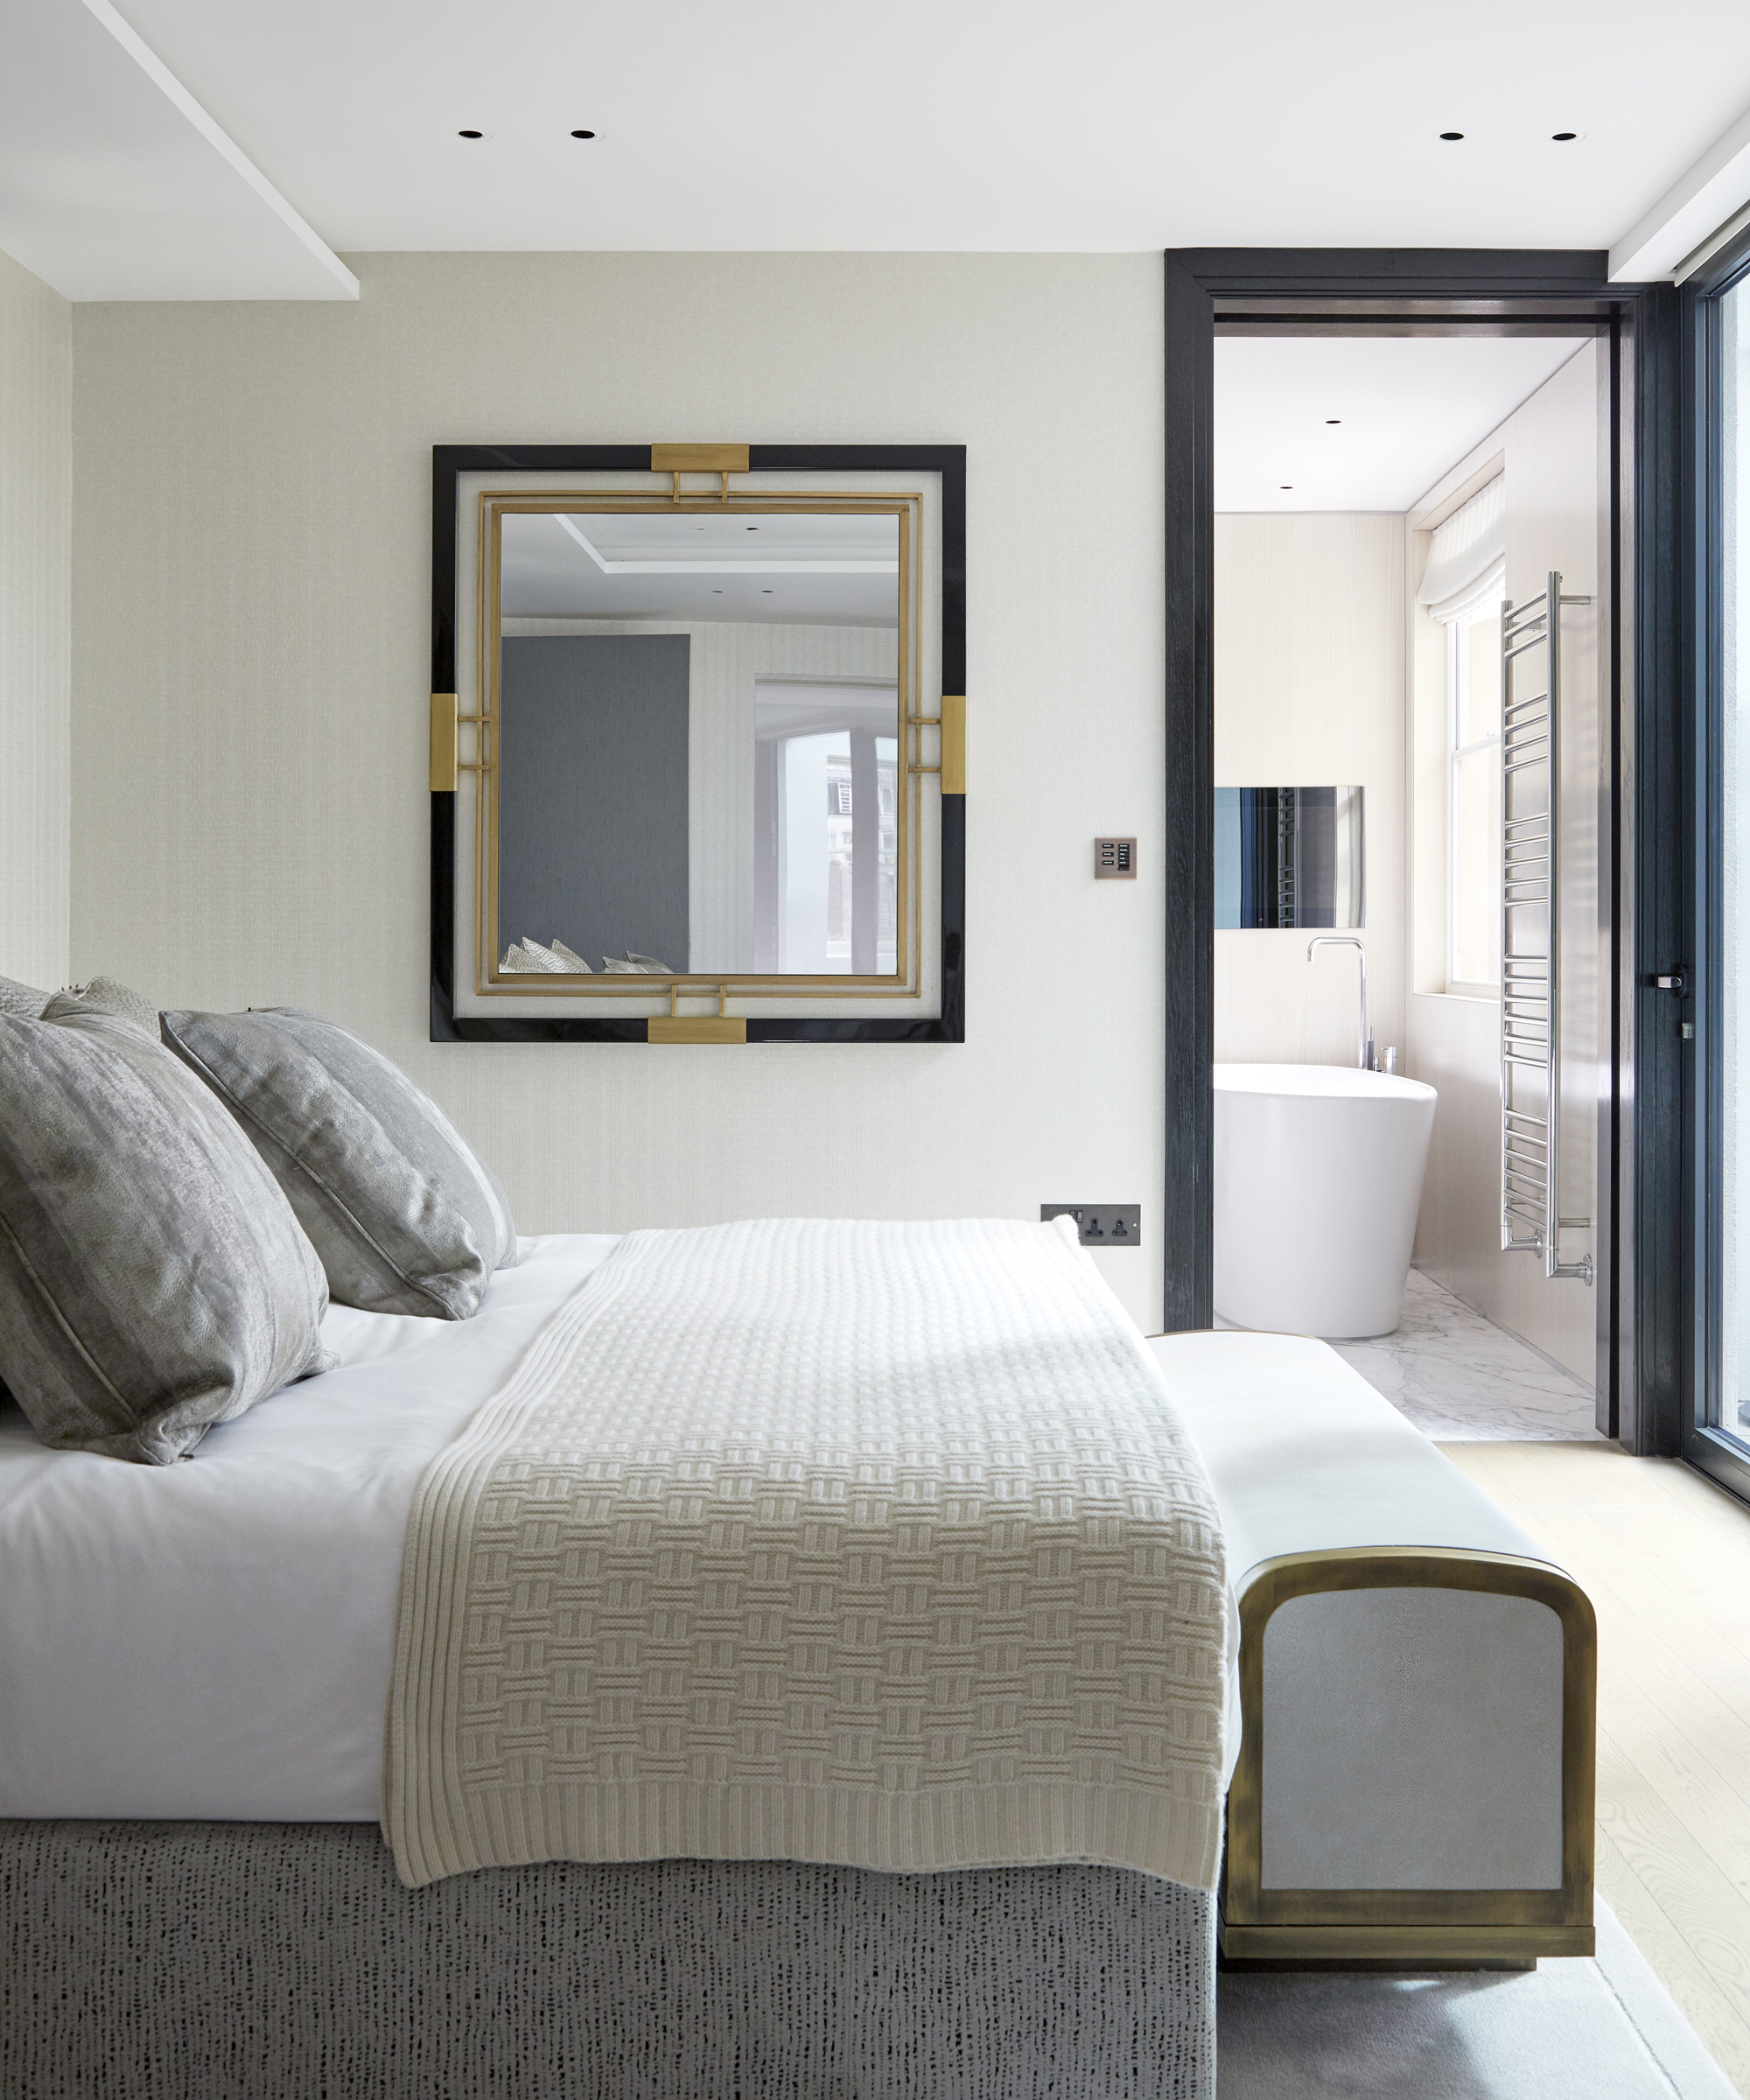 A white bedroom idea with dark blue painted woodwork and black and gold geometric mirror